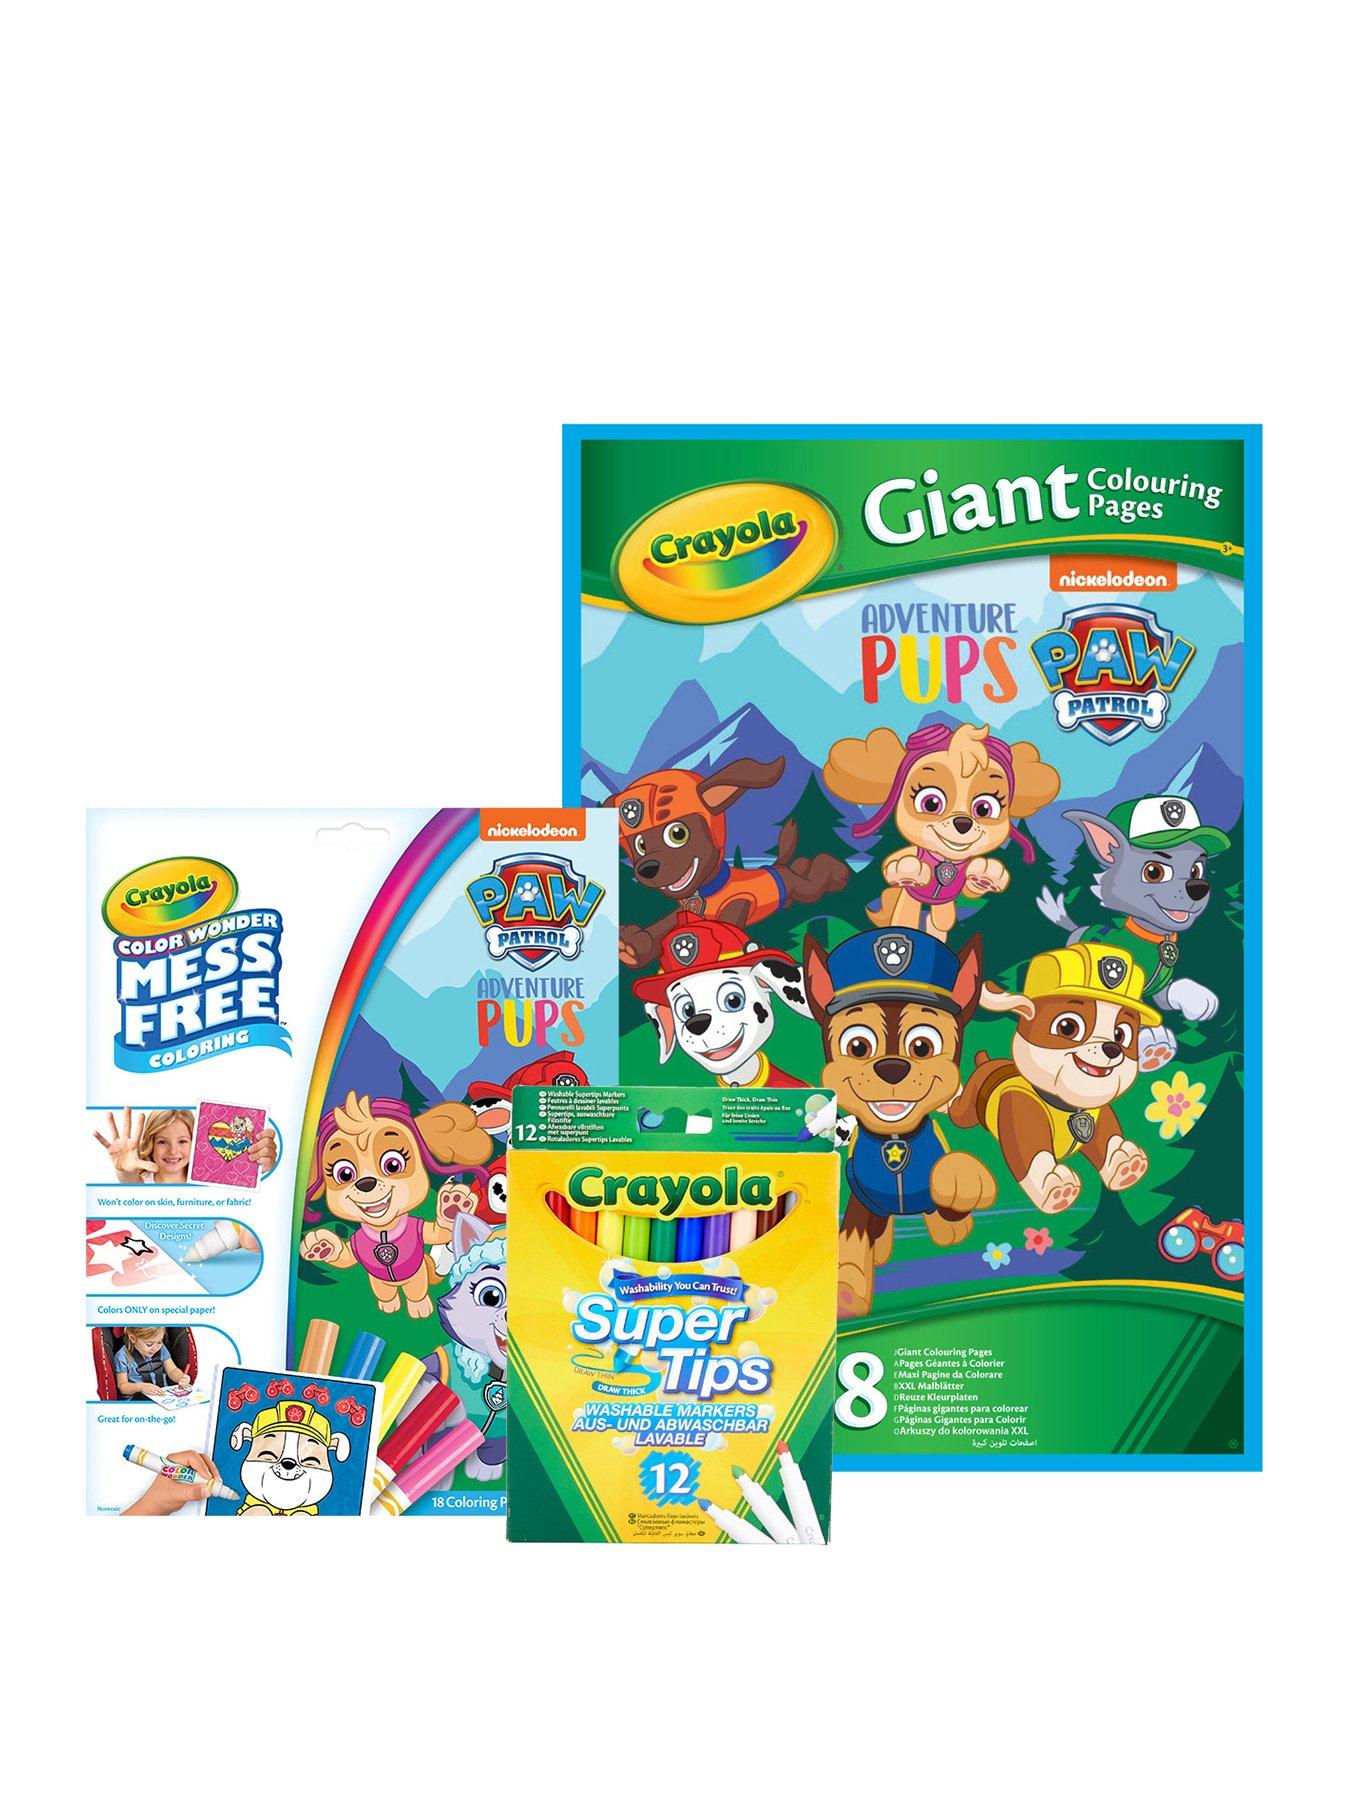 Crayola Color Wonder Paw Patrol Travel Easel with 30 Bonus Pages, Full Size Color Wonder Markers and Paints!